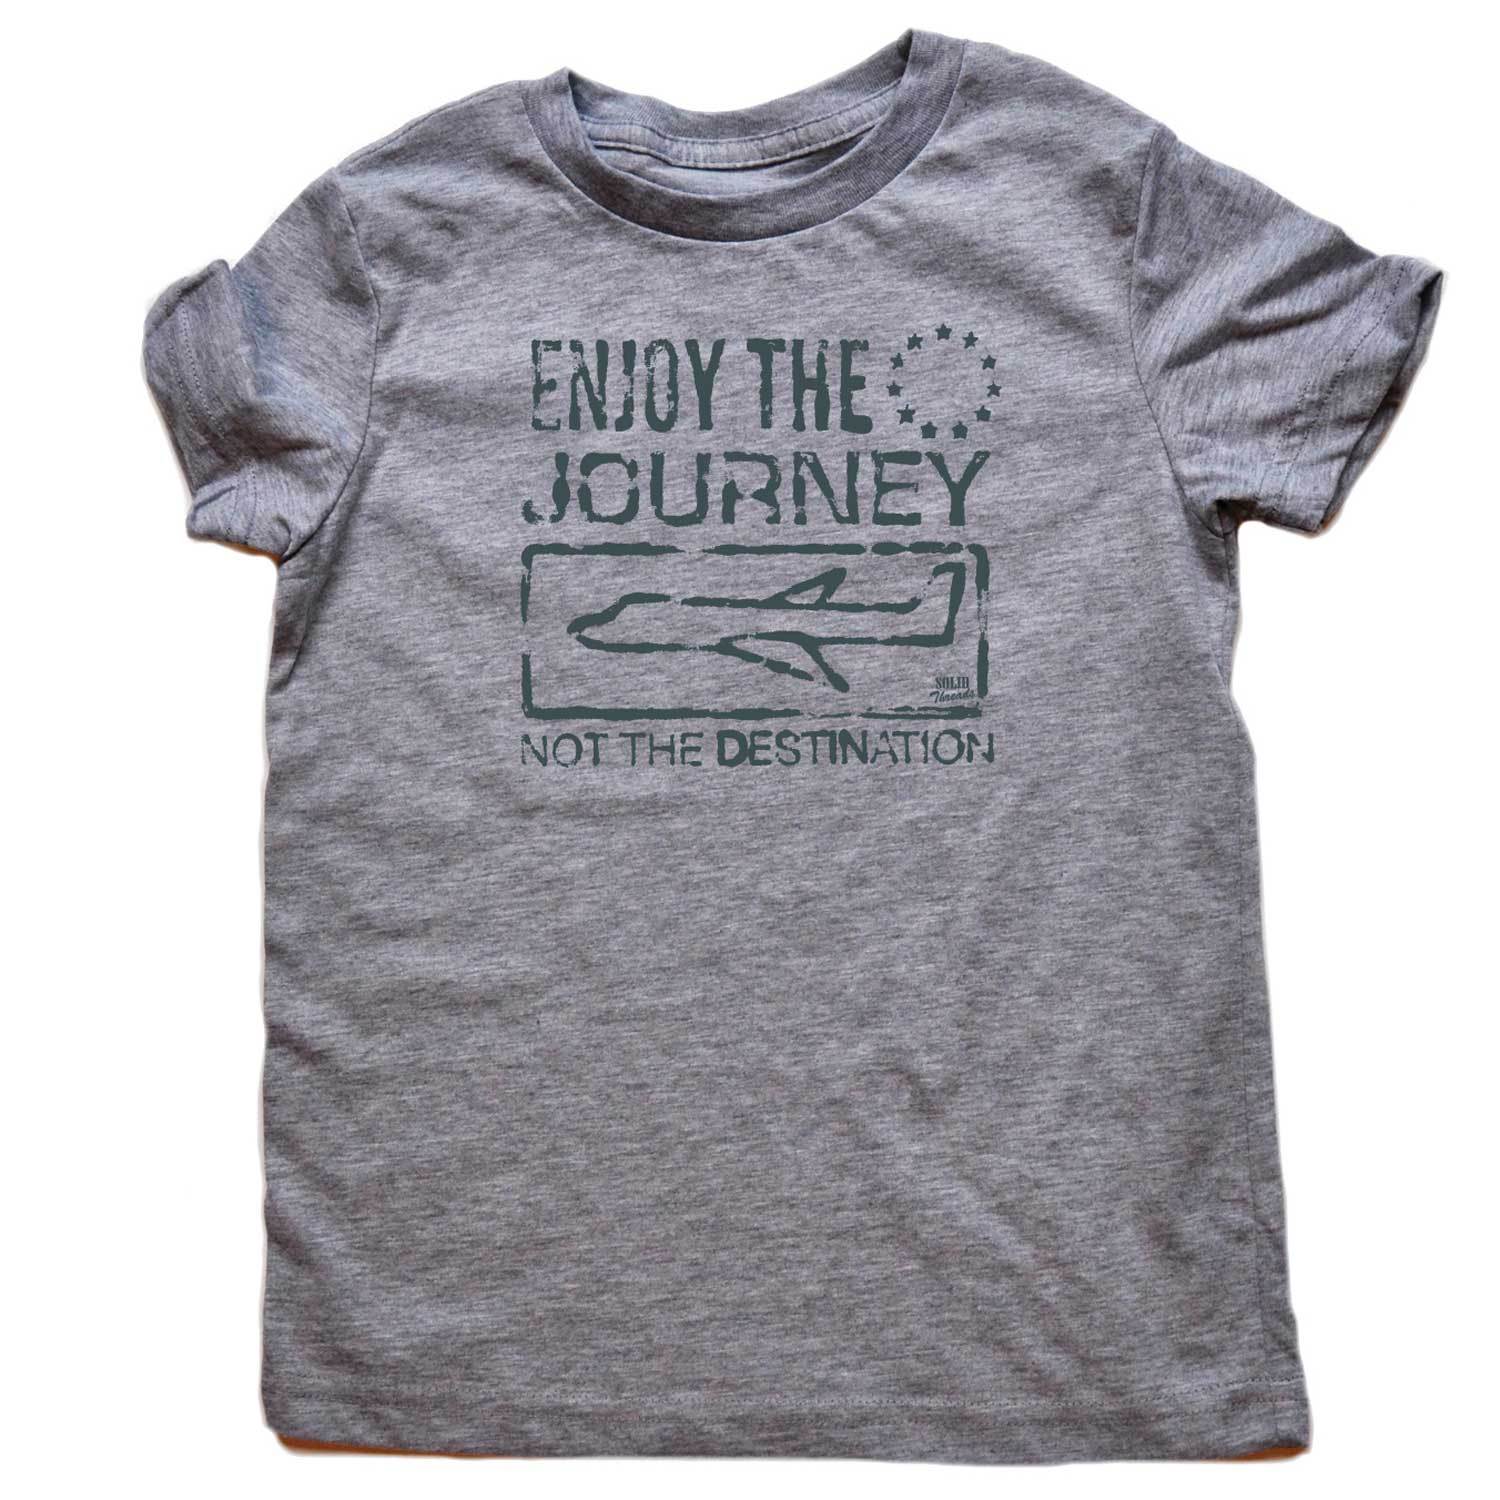 Kids' Enjoy the Journey Not the Destination Vintage Graphic T-shirt | Retro Plane Toddler's Tee | Solid Threads